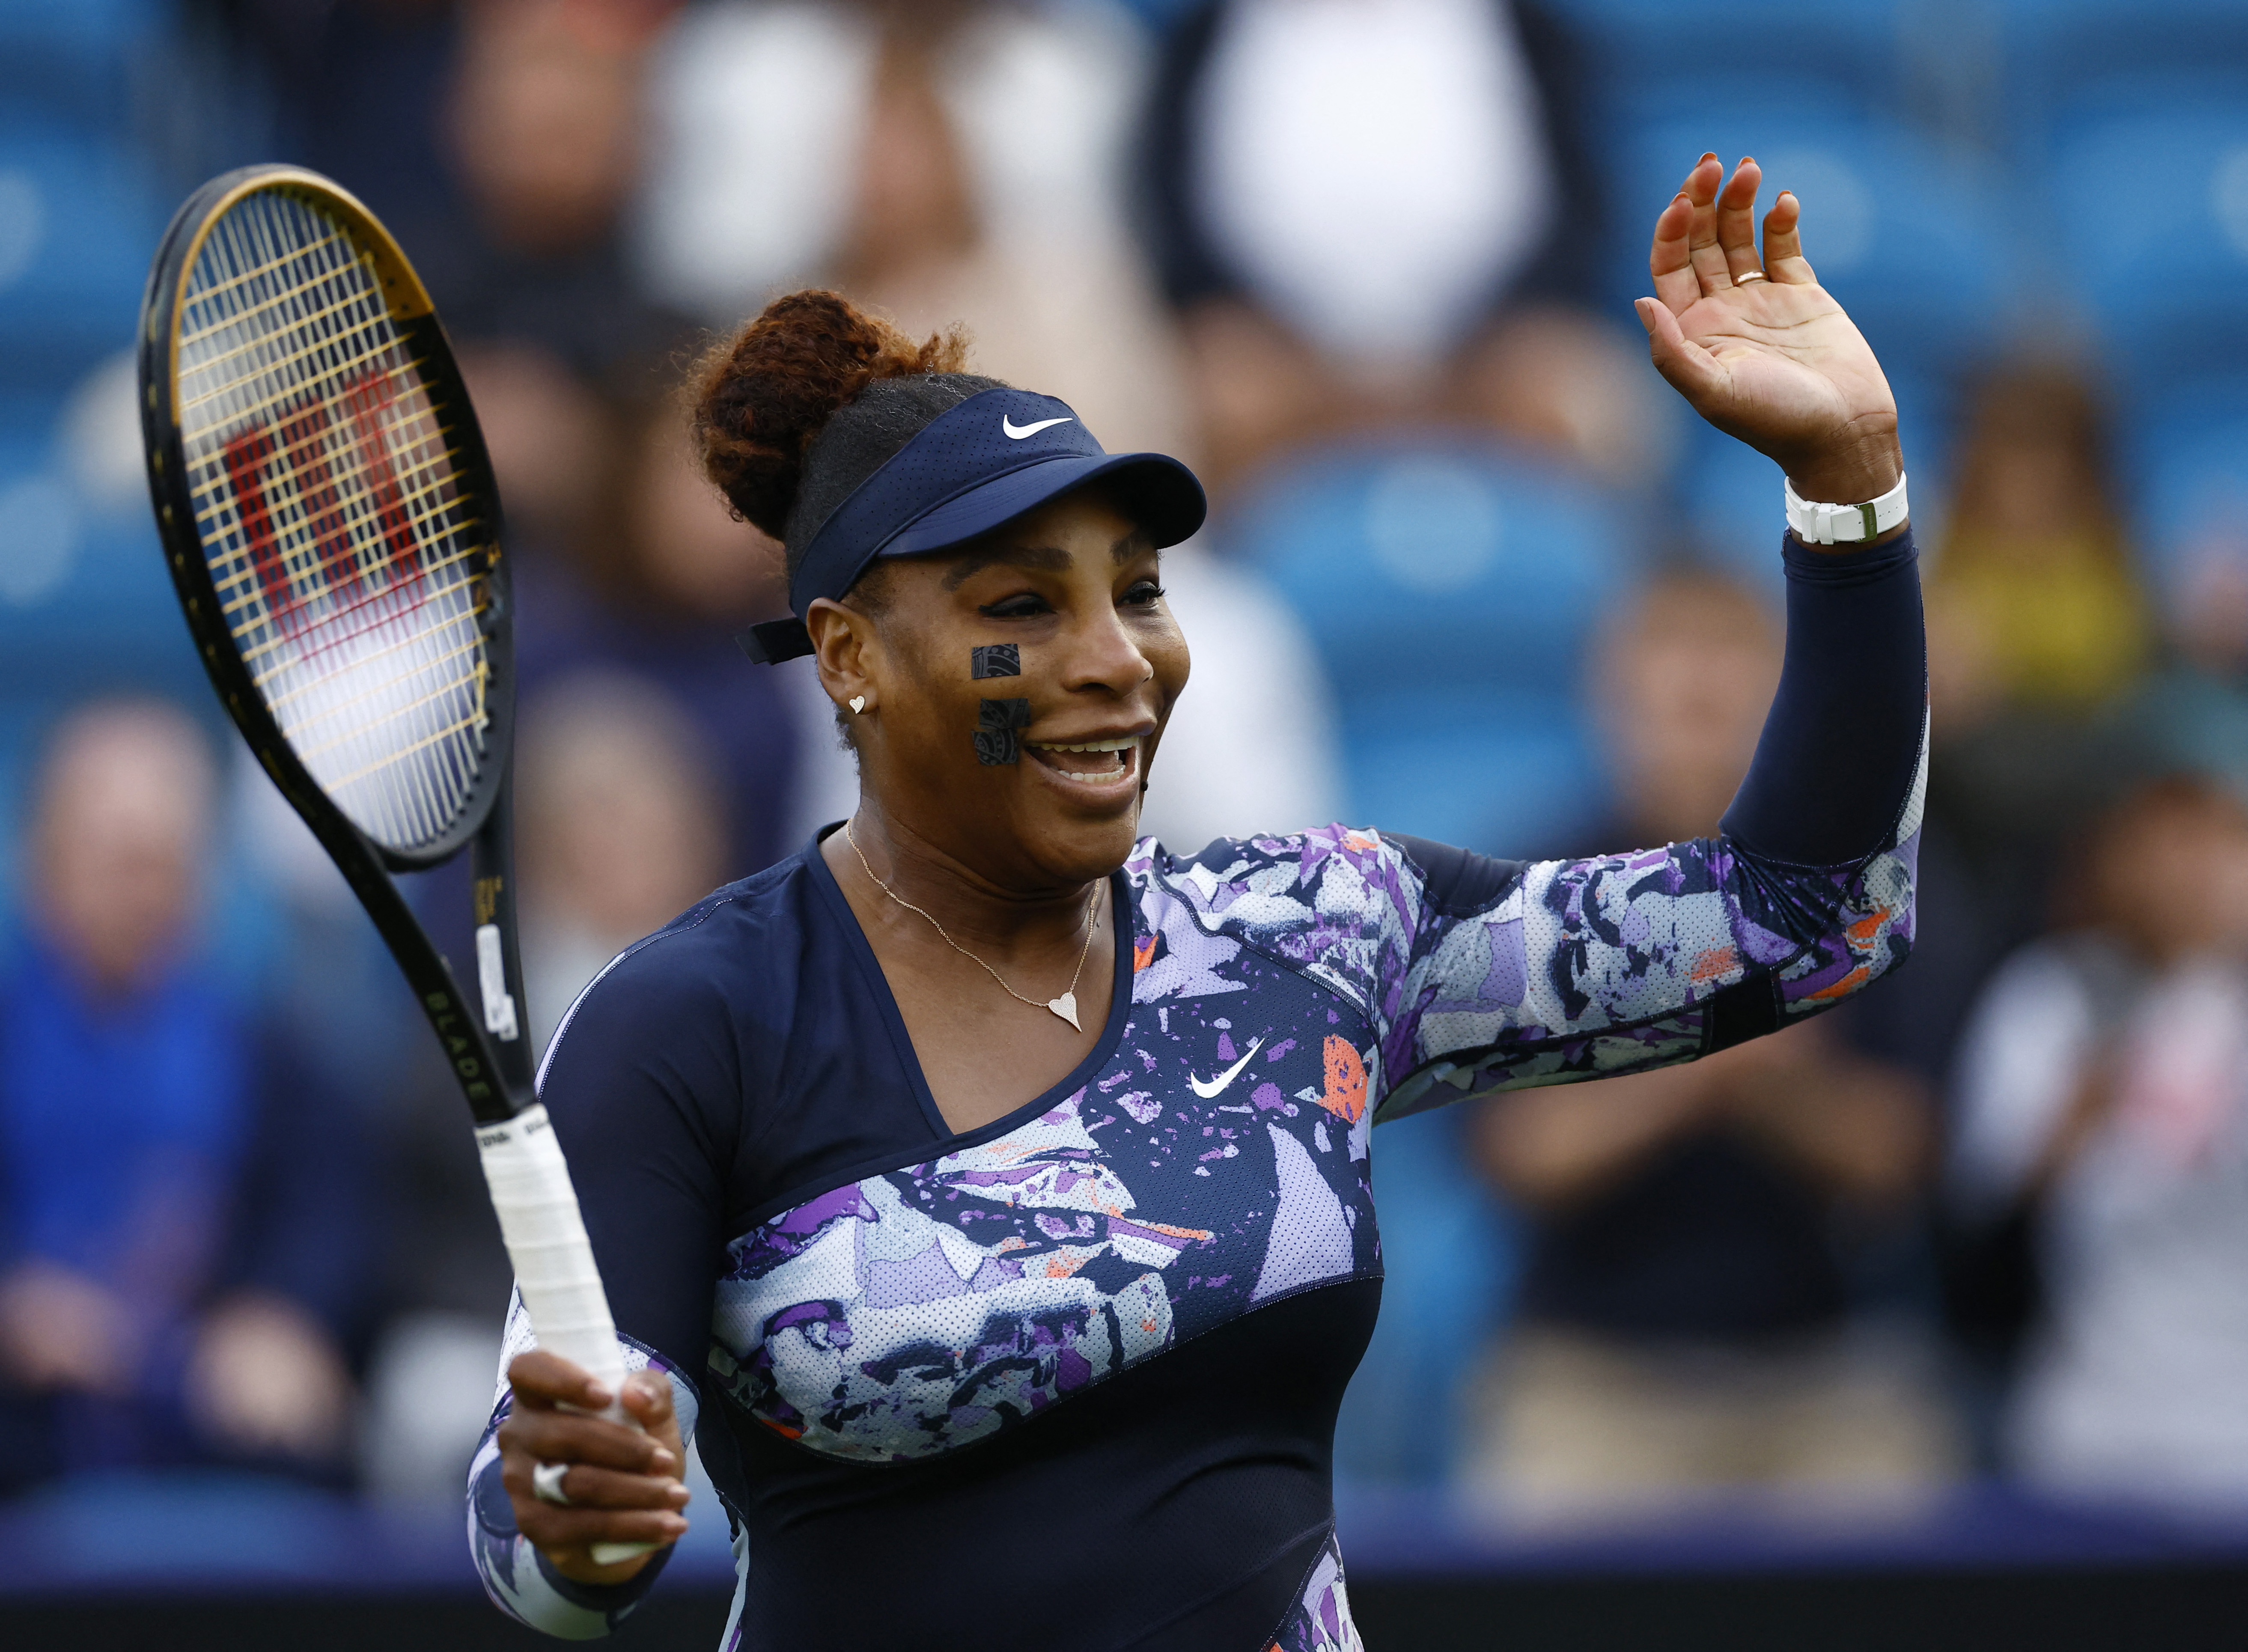 Serena Williams returns to tennis after year-long layoff with